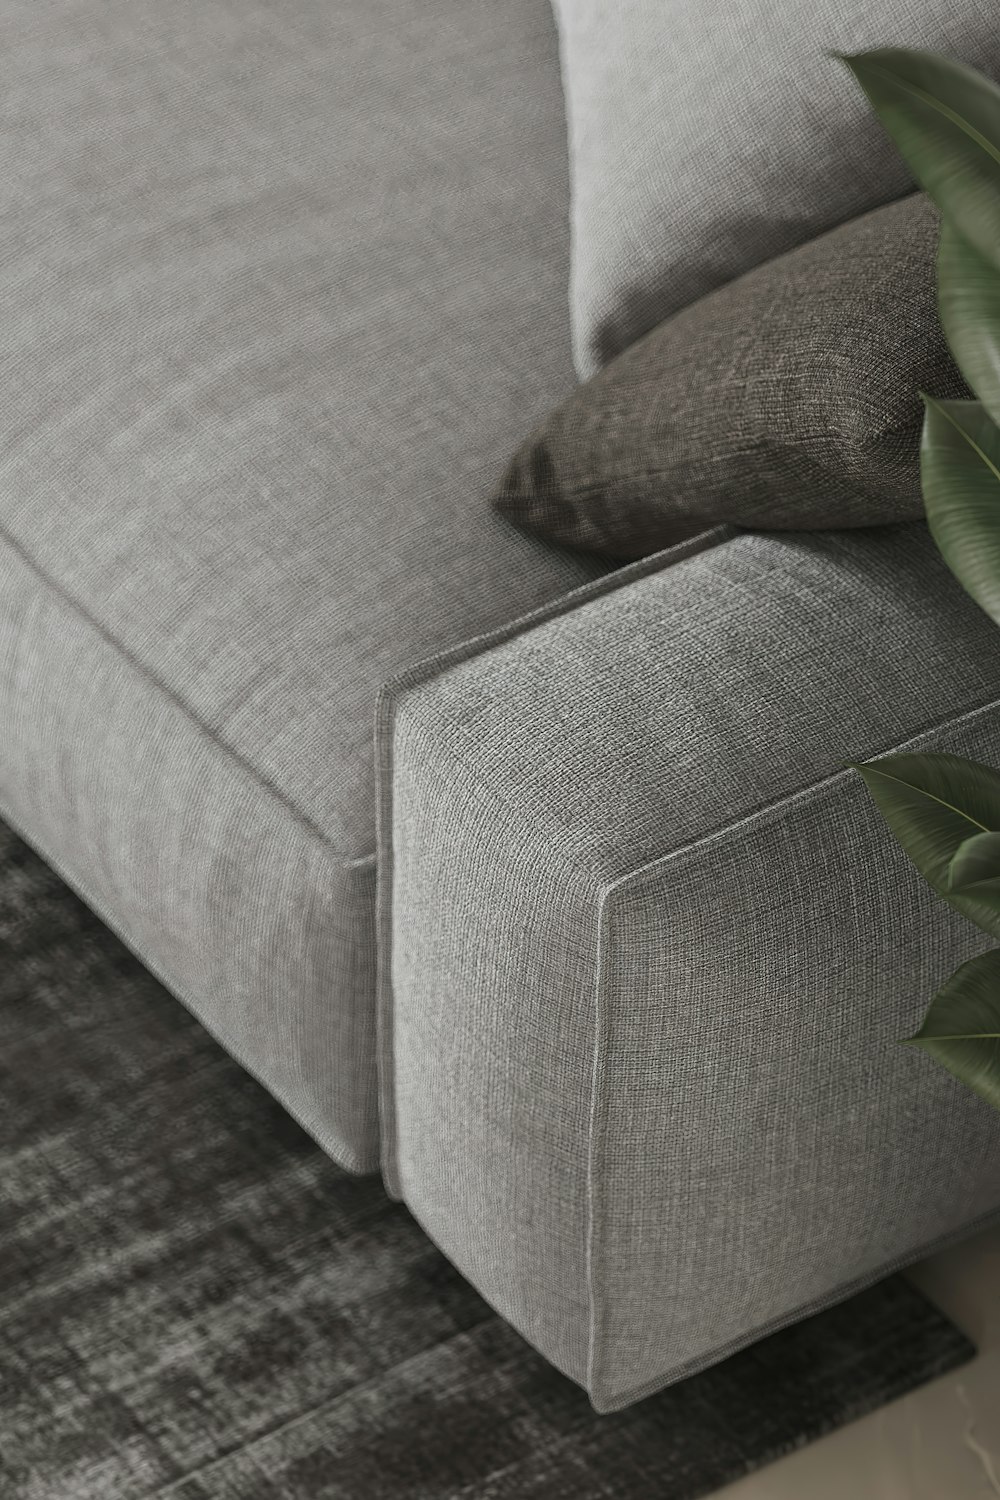 a close up of a couch with a plant on it